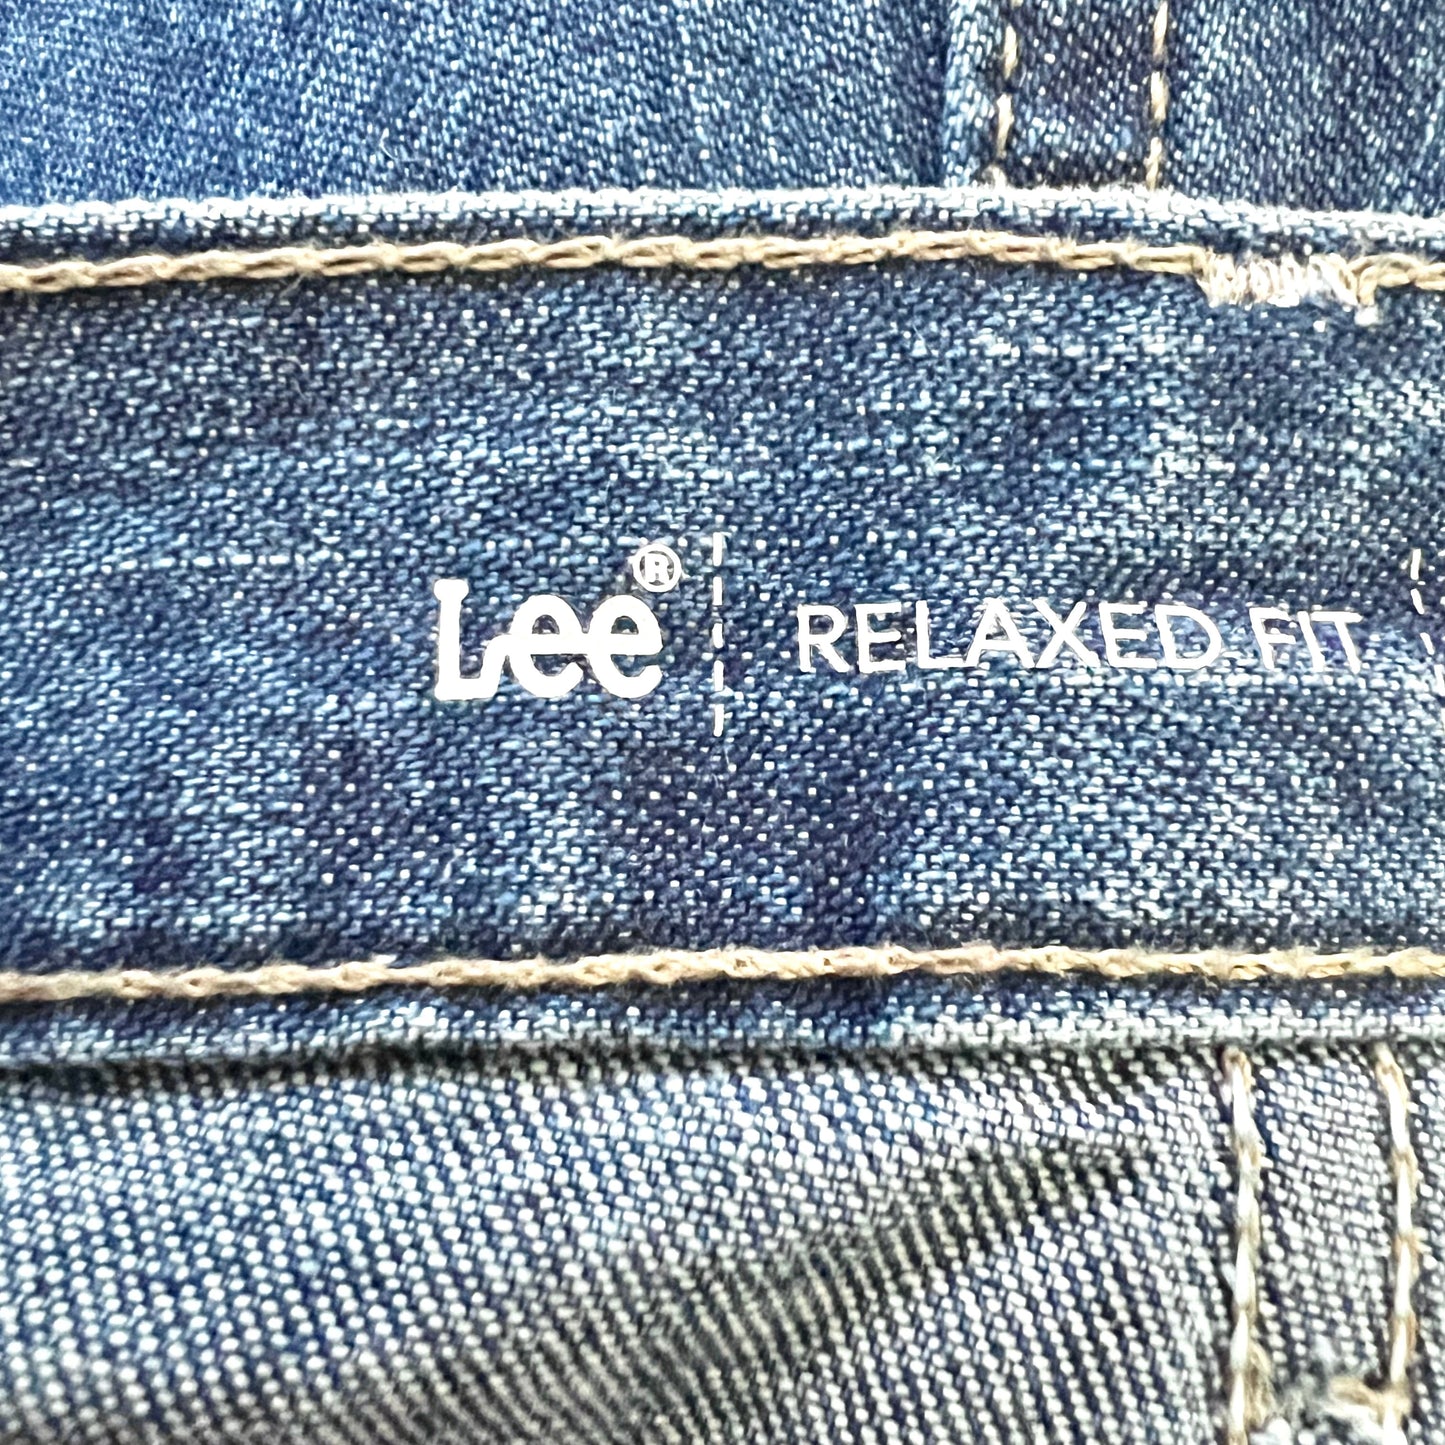 Jeans Straight By Lee  Size: 14